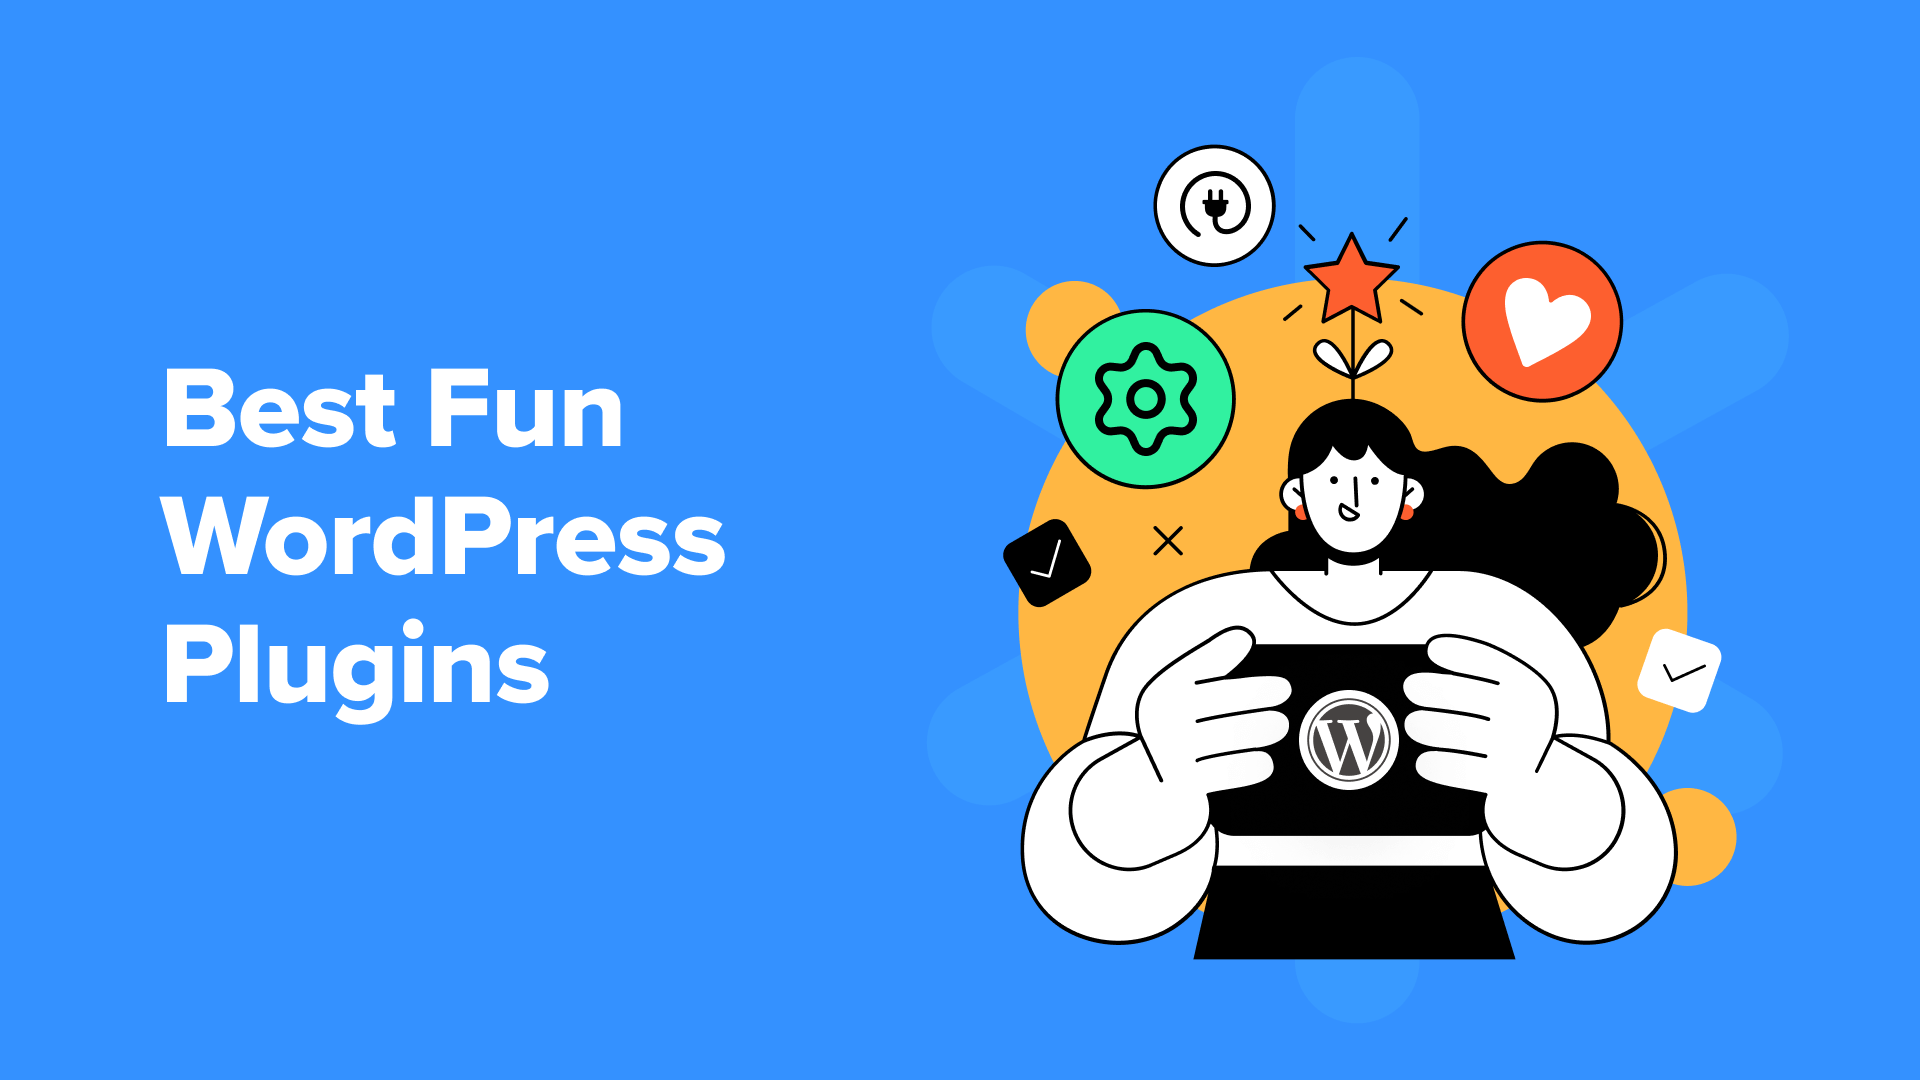 13 Best Fun WordPress Plugins You're Missing Out On